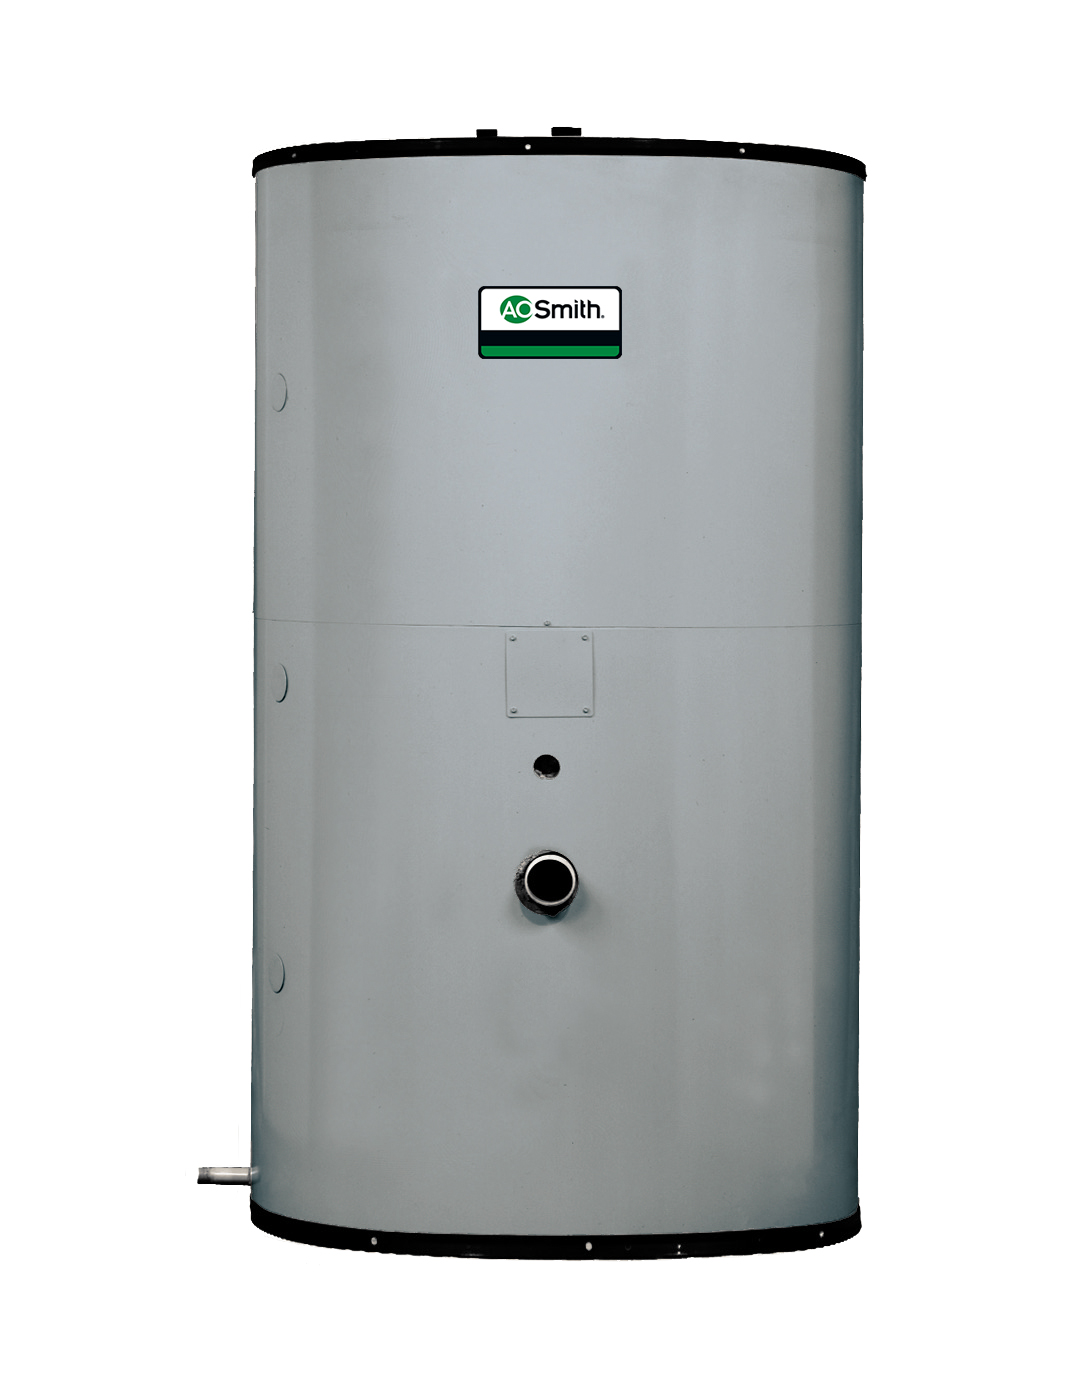 AO SMITH TJ80A: 80 GALLON, JACKETED-VERTICAL ONLY,ROUND WATER HEATER STORAGE TANK, 160 PSI